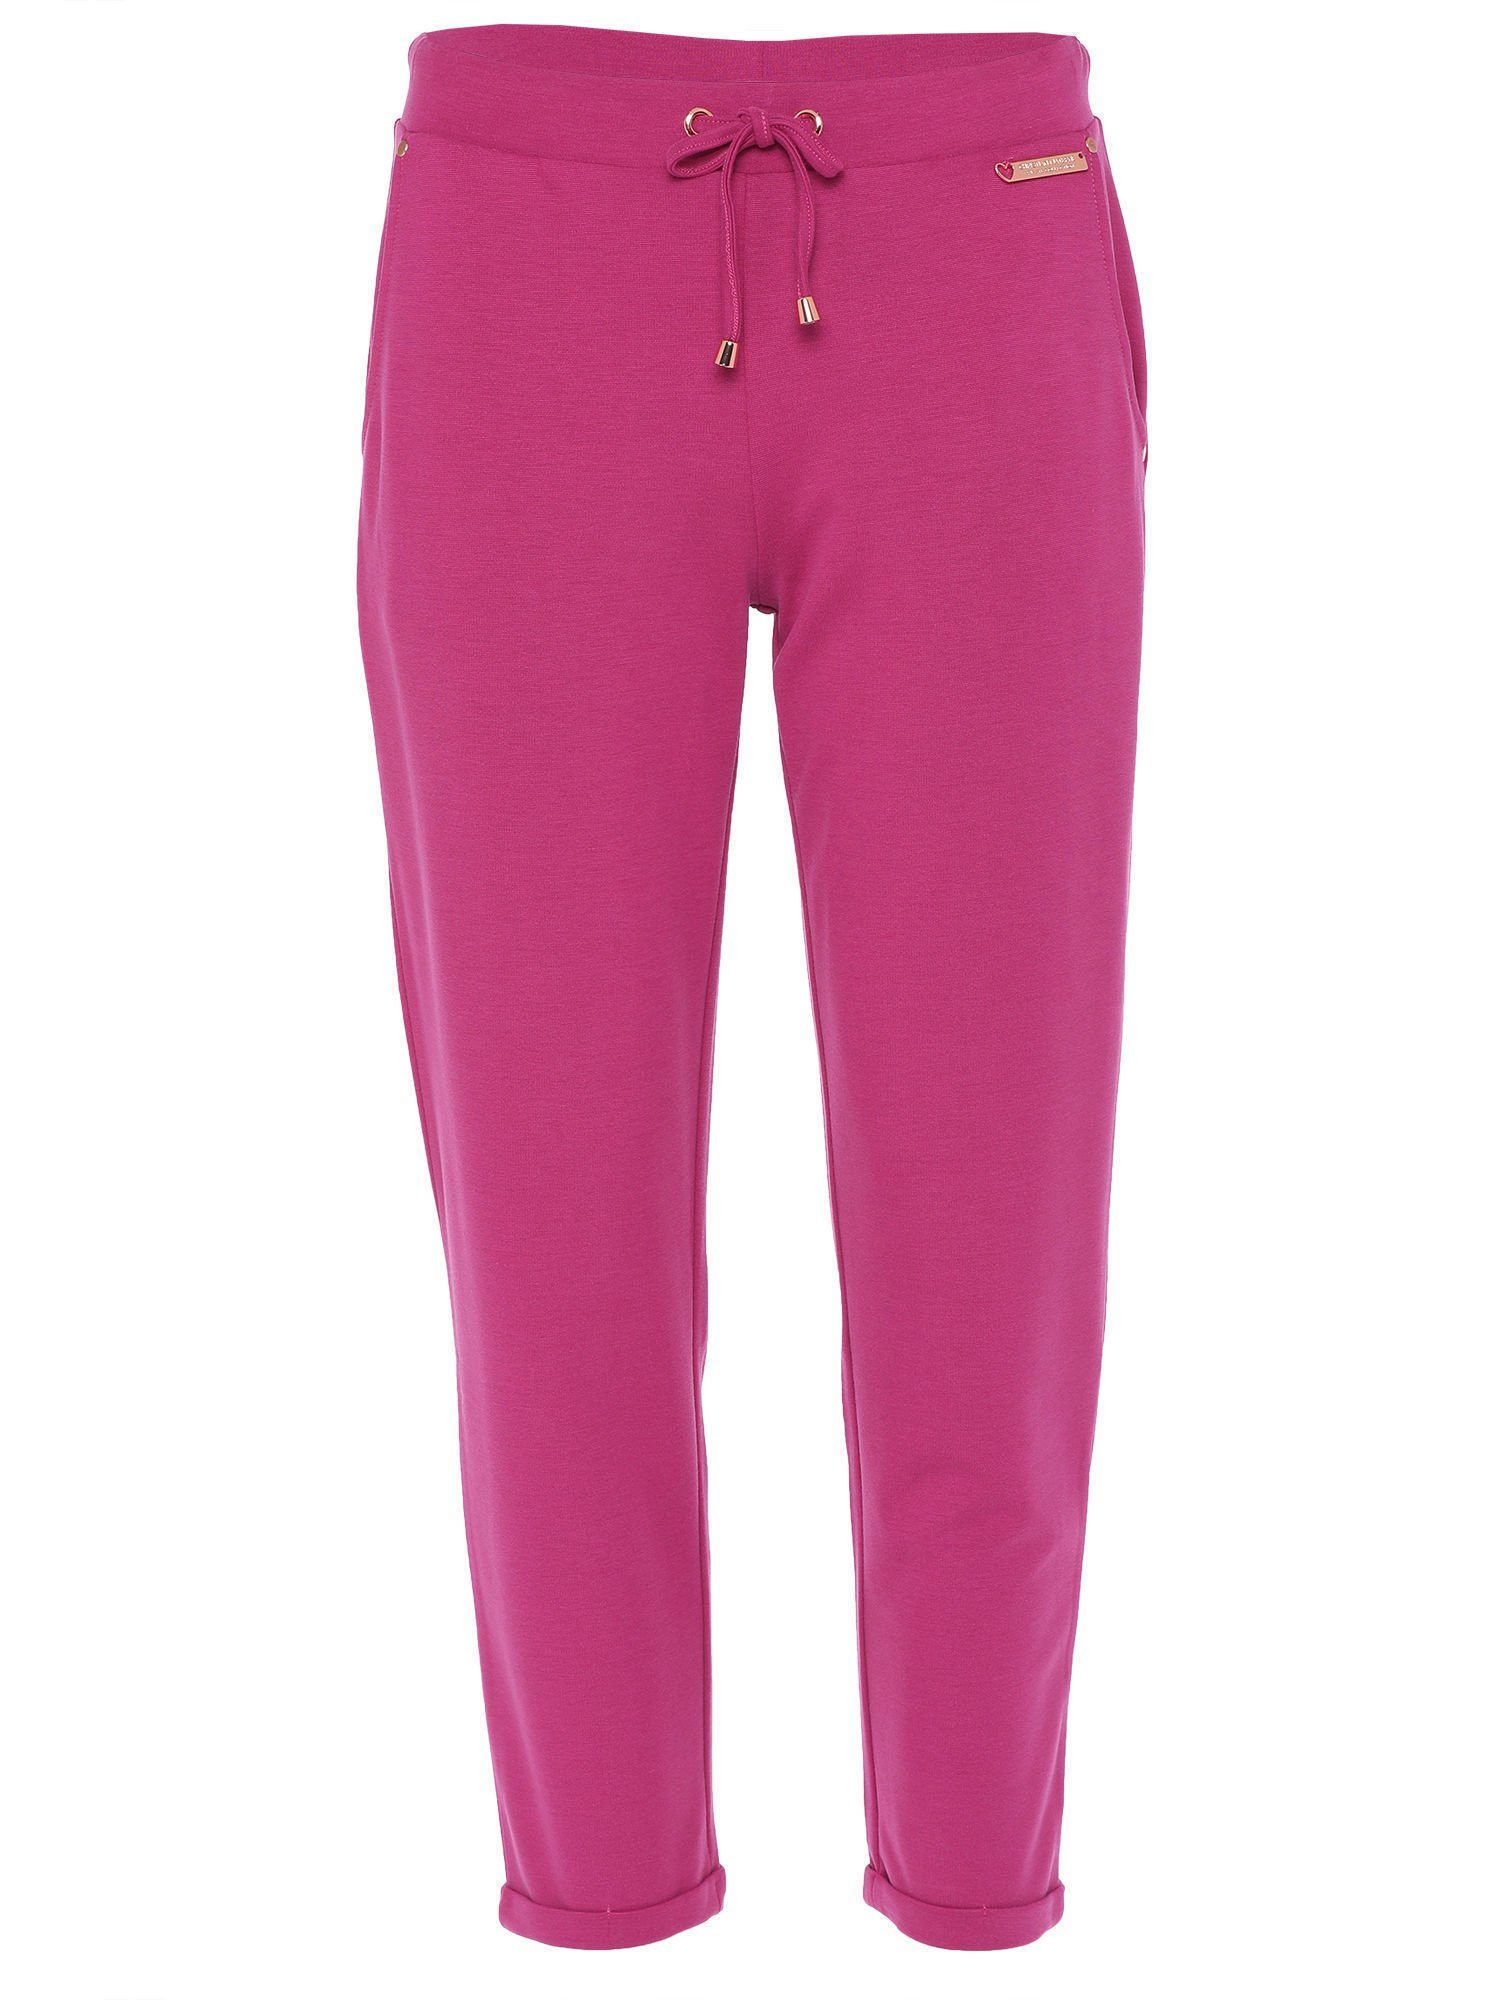 Christian Materne Jogger Pants Relaxhose mit Umschlagsaum fuchsia